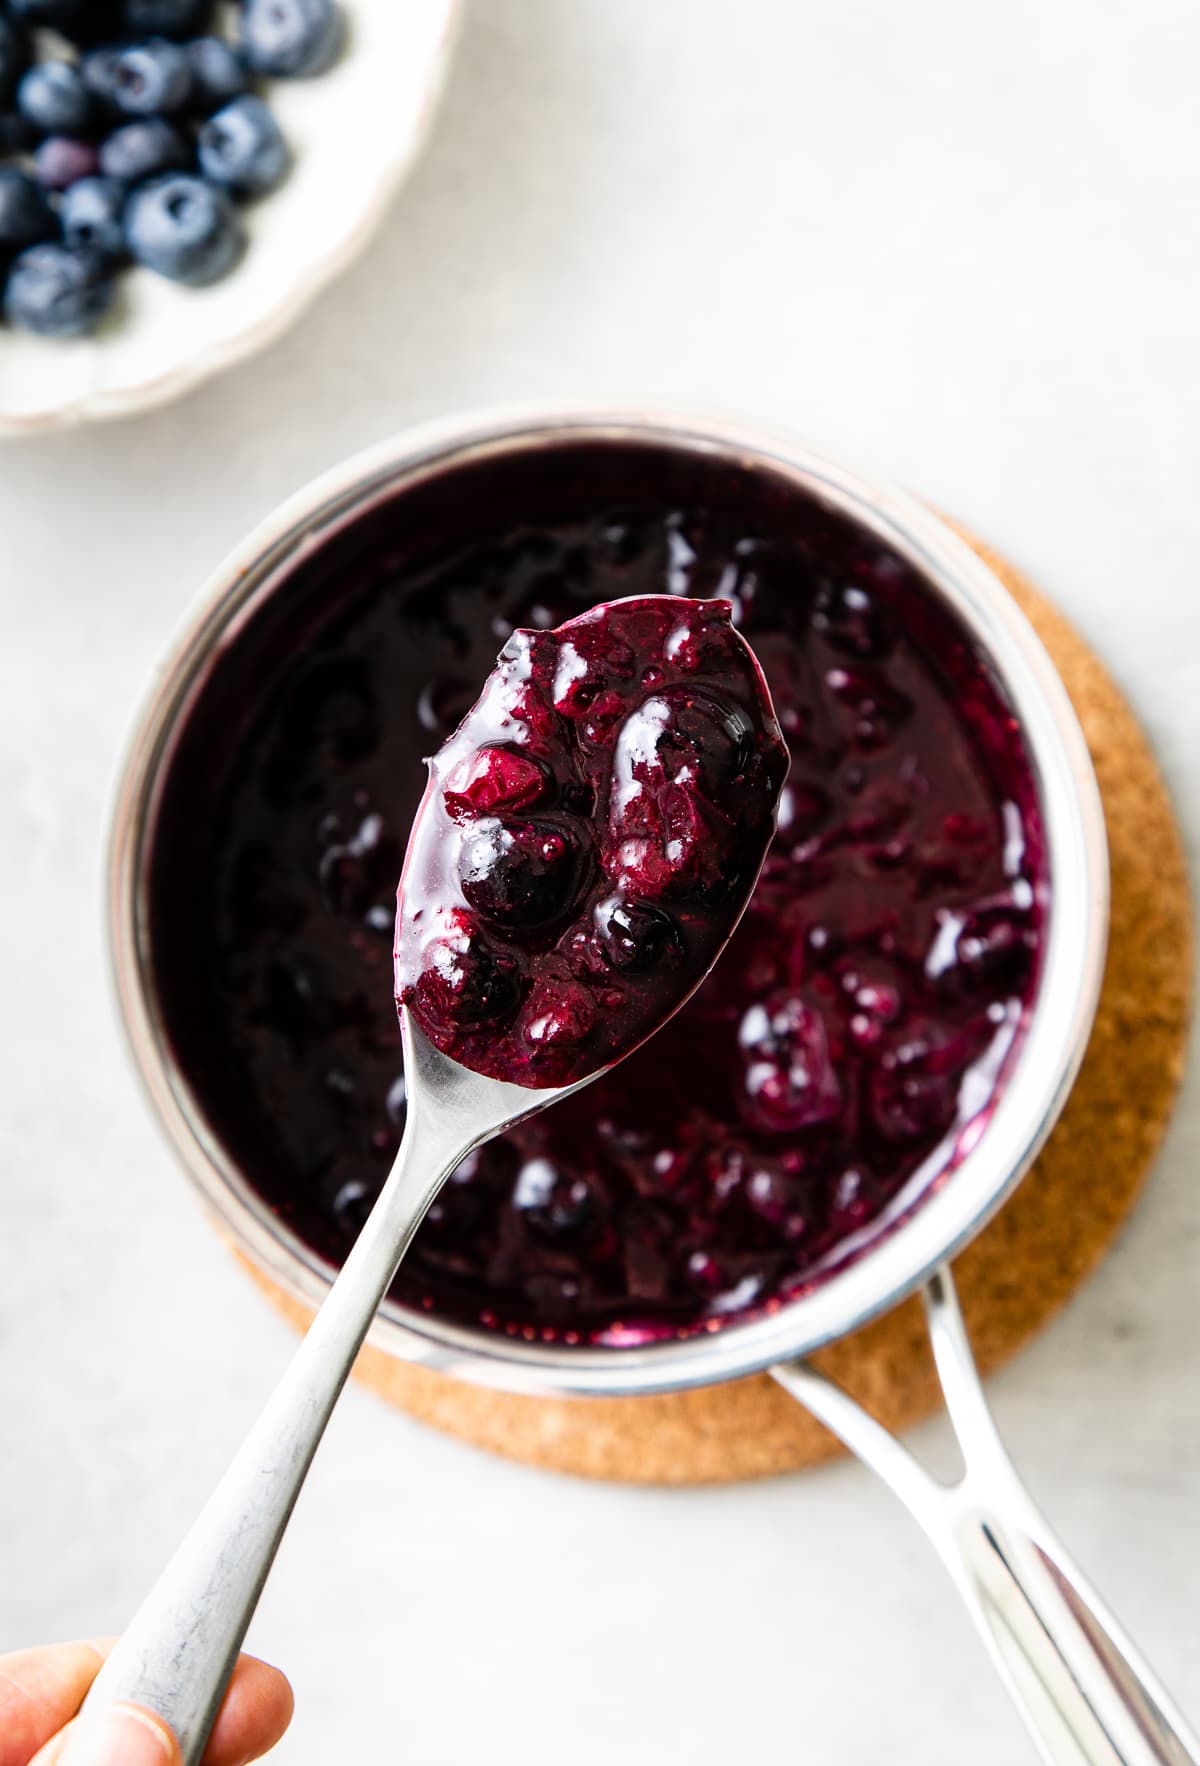 top down view of spoon holding scoop of blueberry compote over small pan with items surrounding.